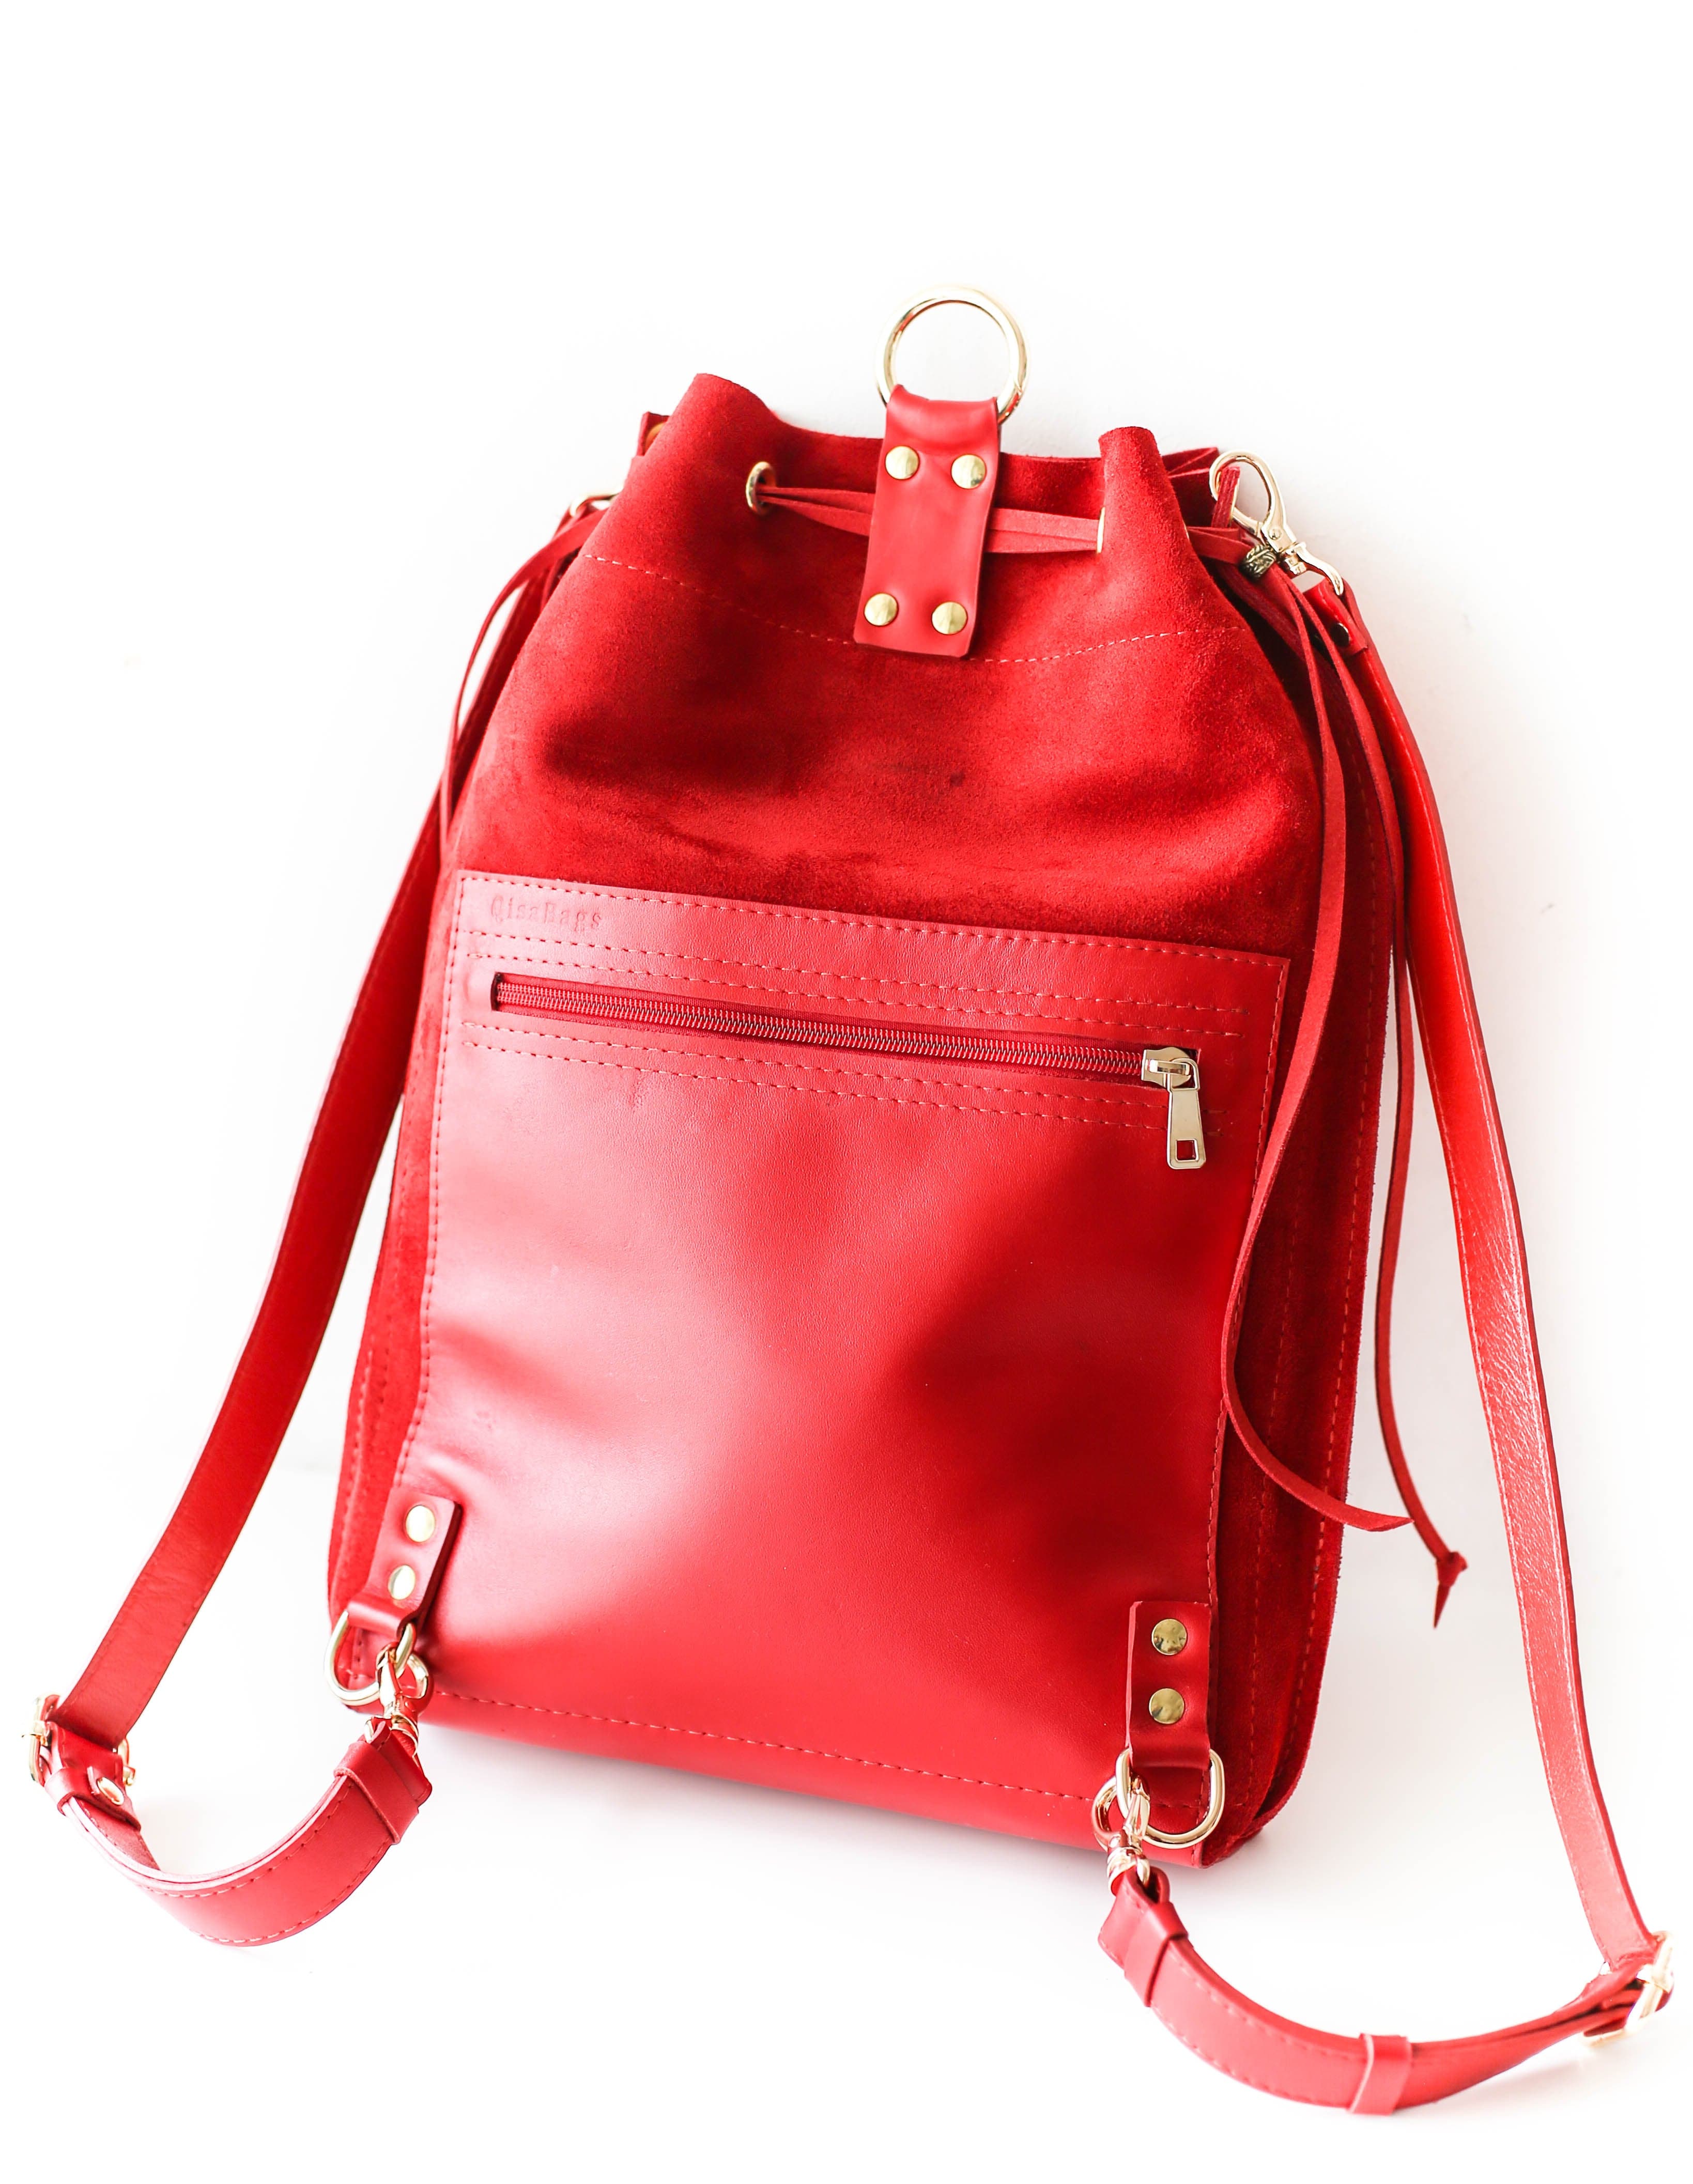 Gucci Guccissima Red Leather Backpack Bag (Pre-Owned)